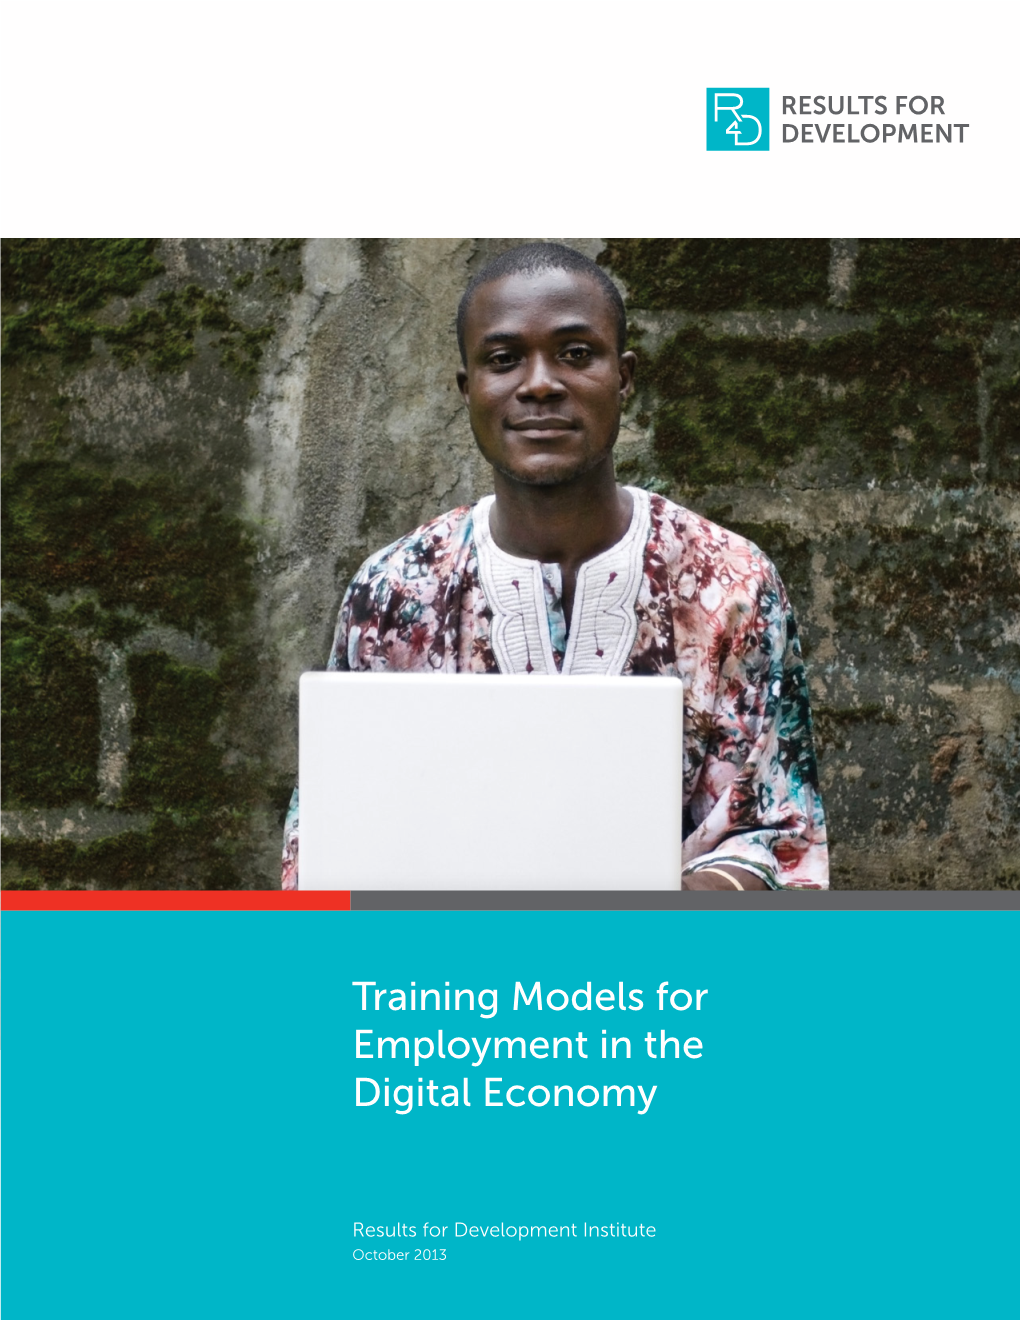 Training Models for Employment in the Digital Economy